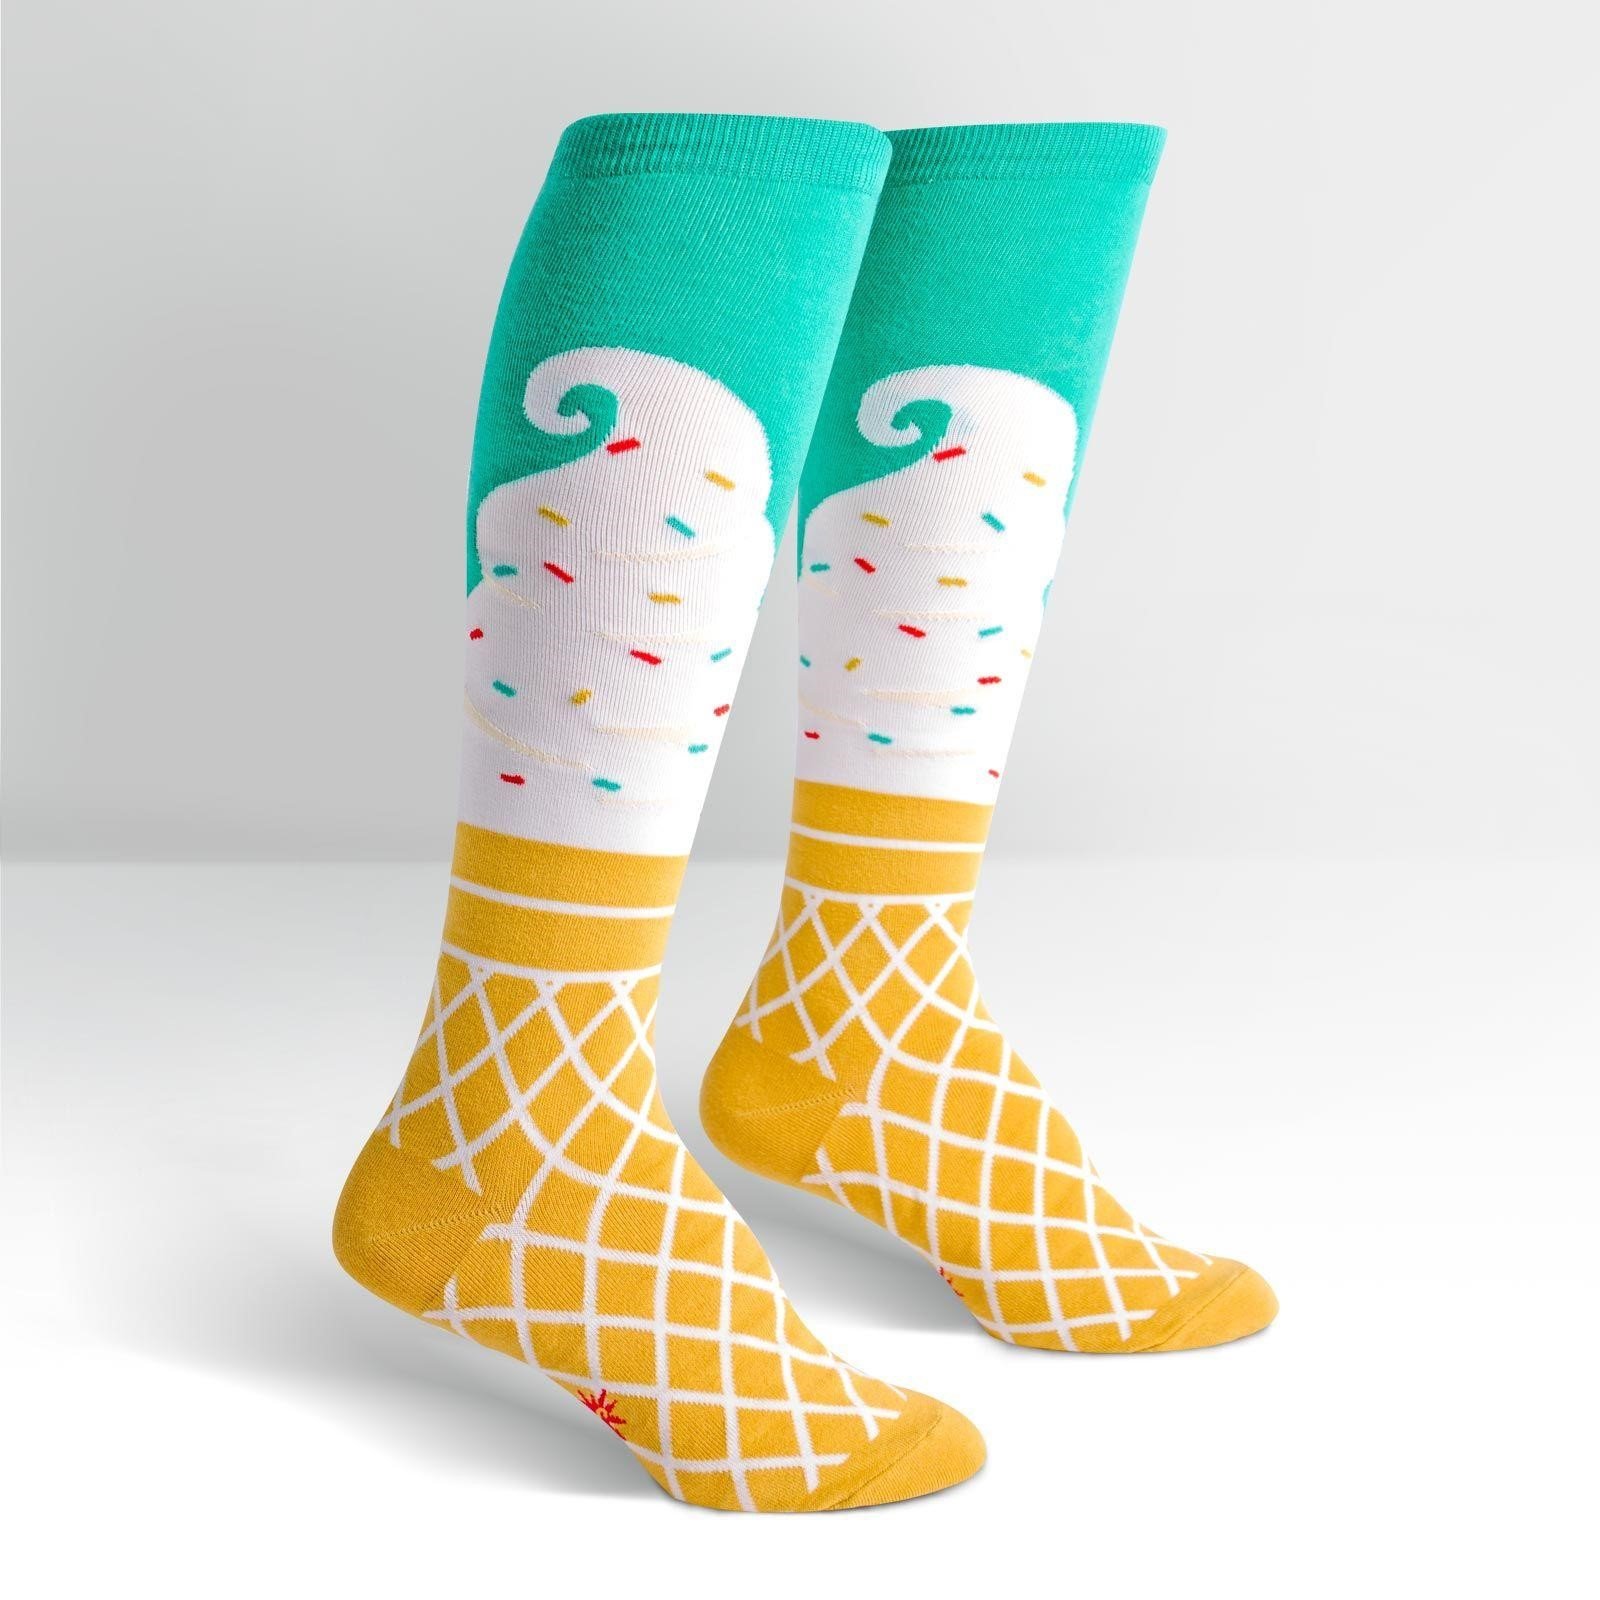 Fun socks - 8 Ideas For Profitable Ecommerce Niches Right Now